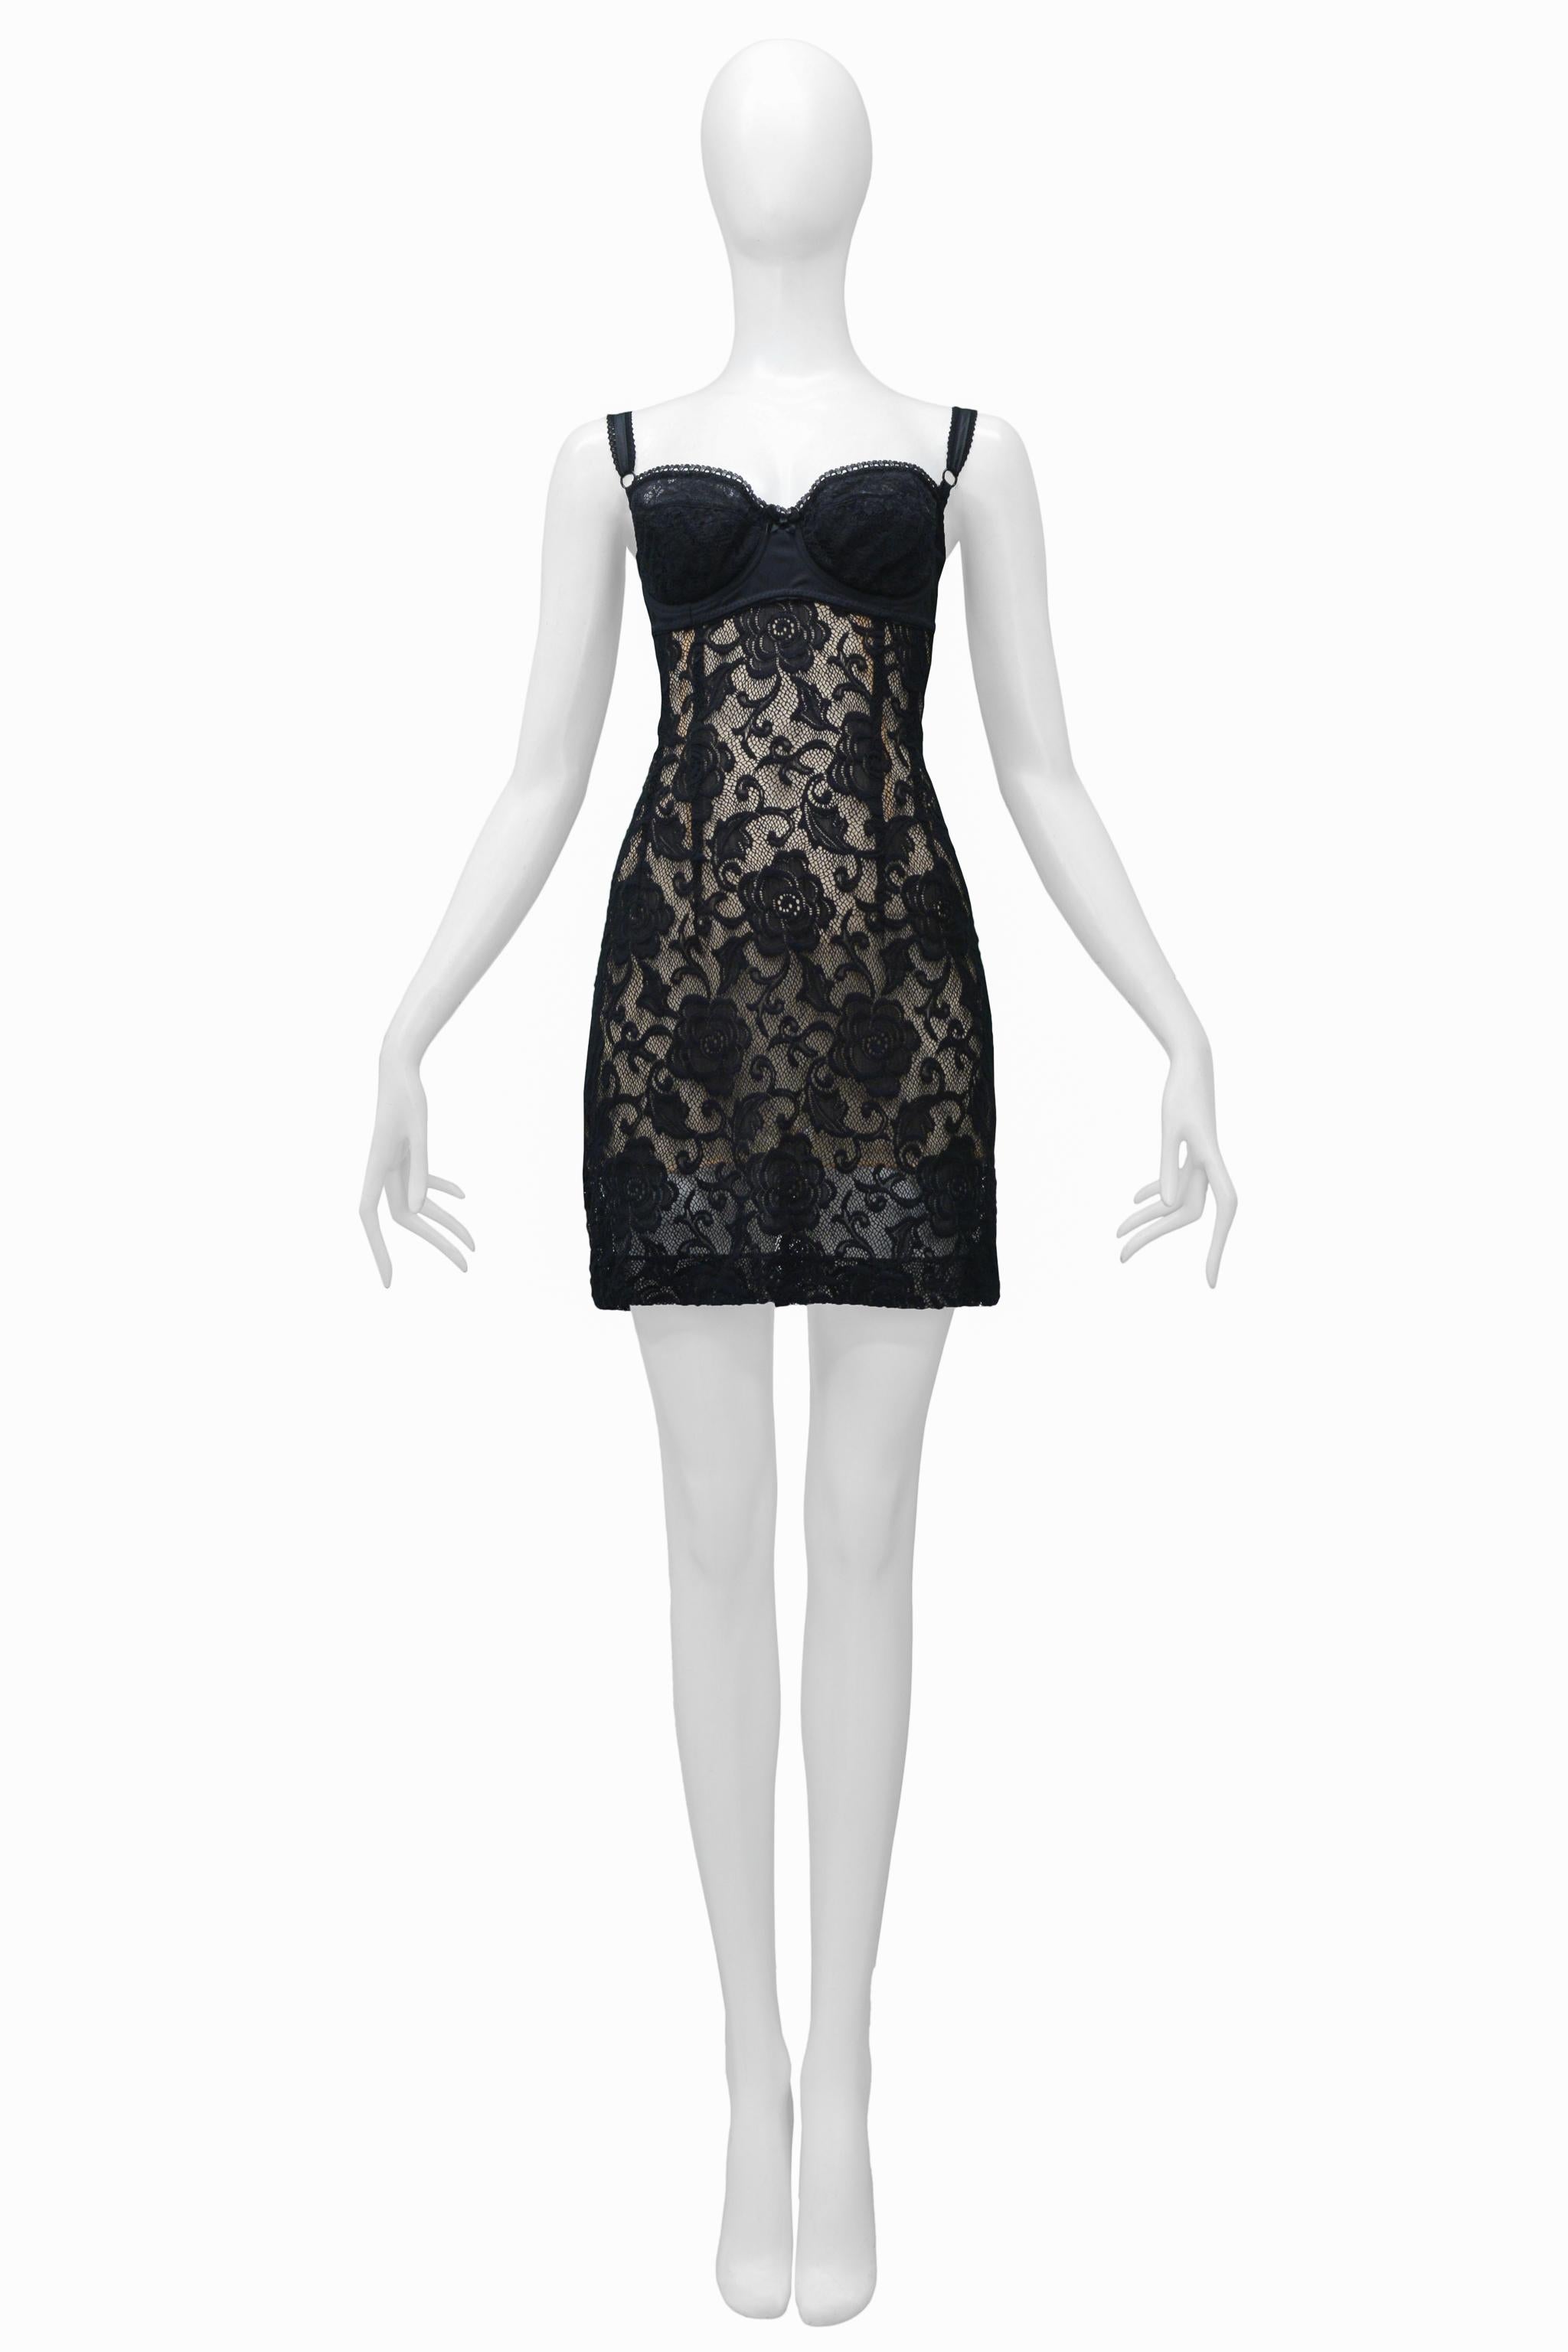 Resurrection Vintage is excited to offer a vintage Dolce & Gabbana black lace dress featuring an attached bra, skinny straps, nude tone underslip, and mini length. 

Dolce & Gabbana
Size: Small
Viscose and Nylon
Excellent Vintage Condition - Never